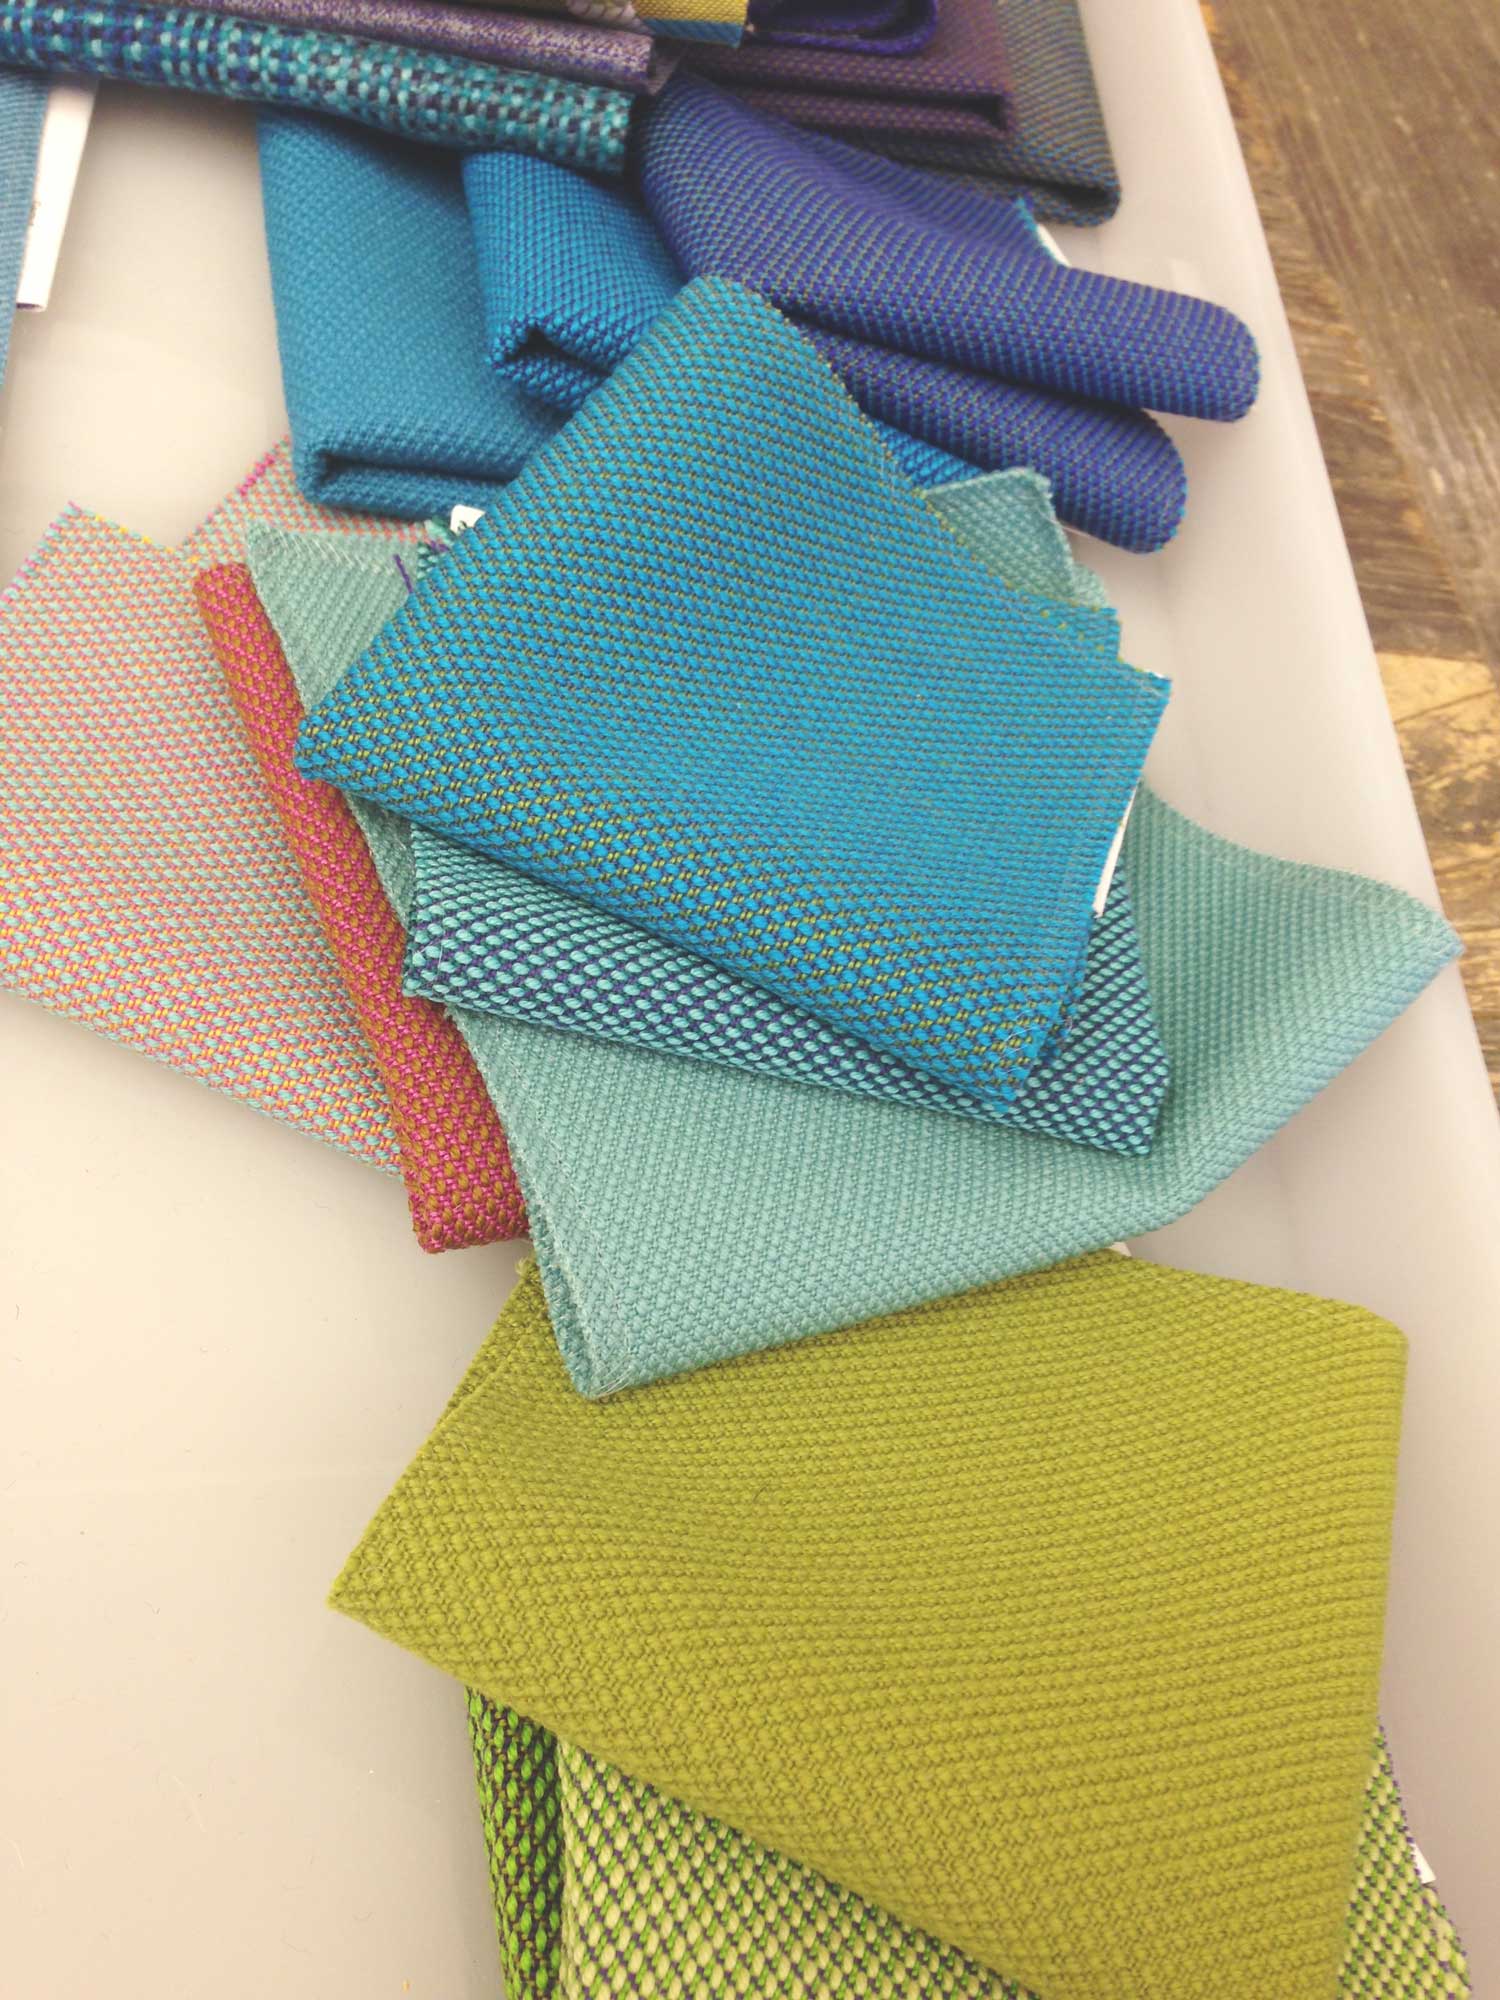 Textile samples for Top Floor Workplace